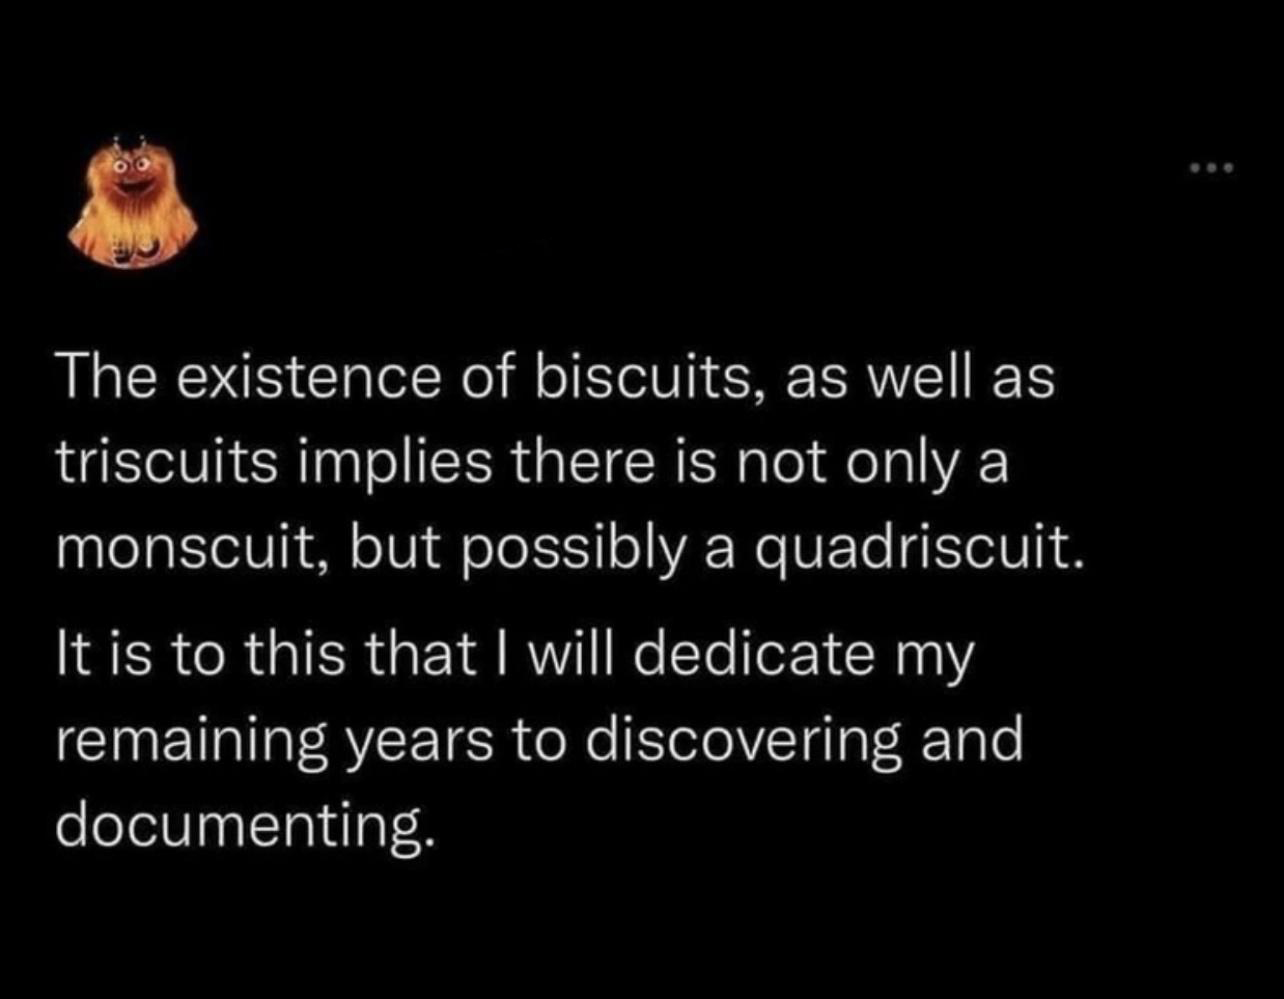 monday morning randomness - existence of biscuits as well as triscuits - The existence of biscuits, as well as triscuits implies there is not only a monscuit, but possibly a quadriscuit. It is to this that I will dedicate my remaining years to discovering